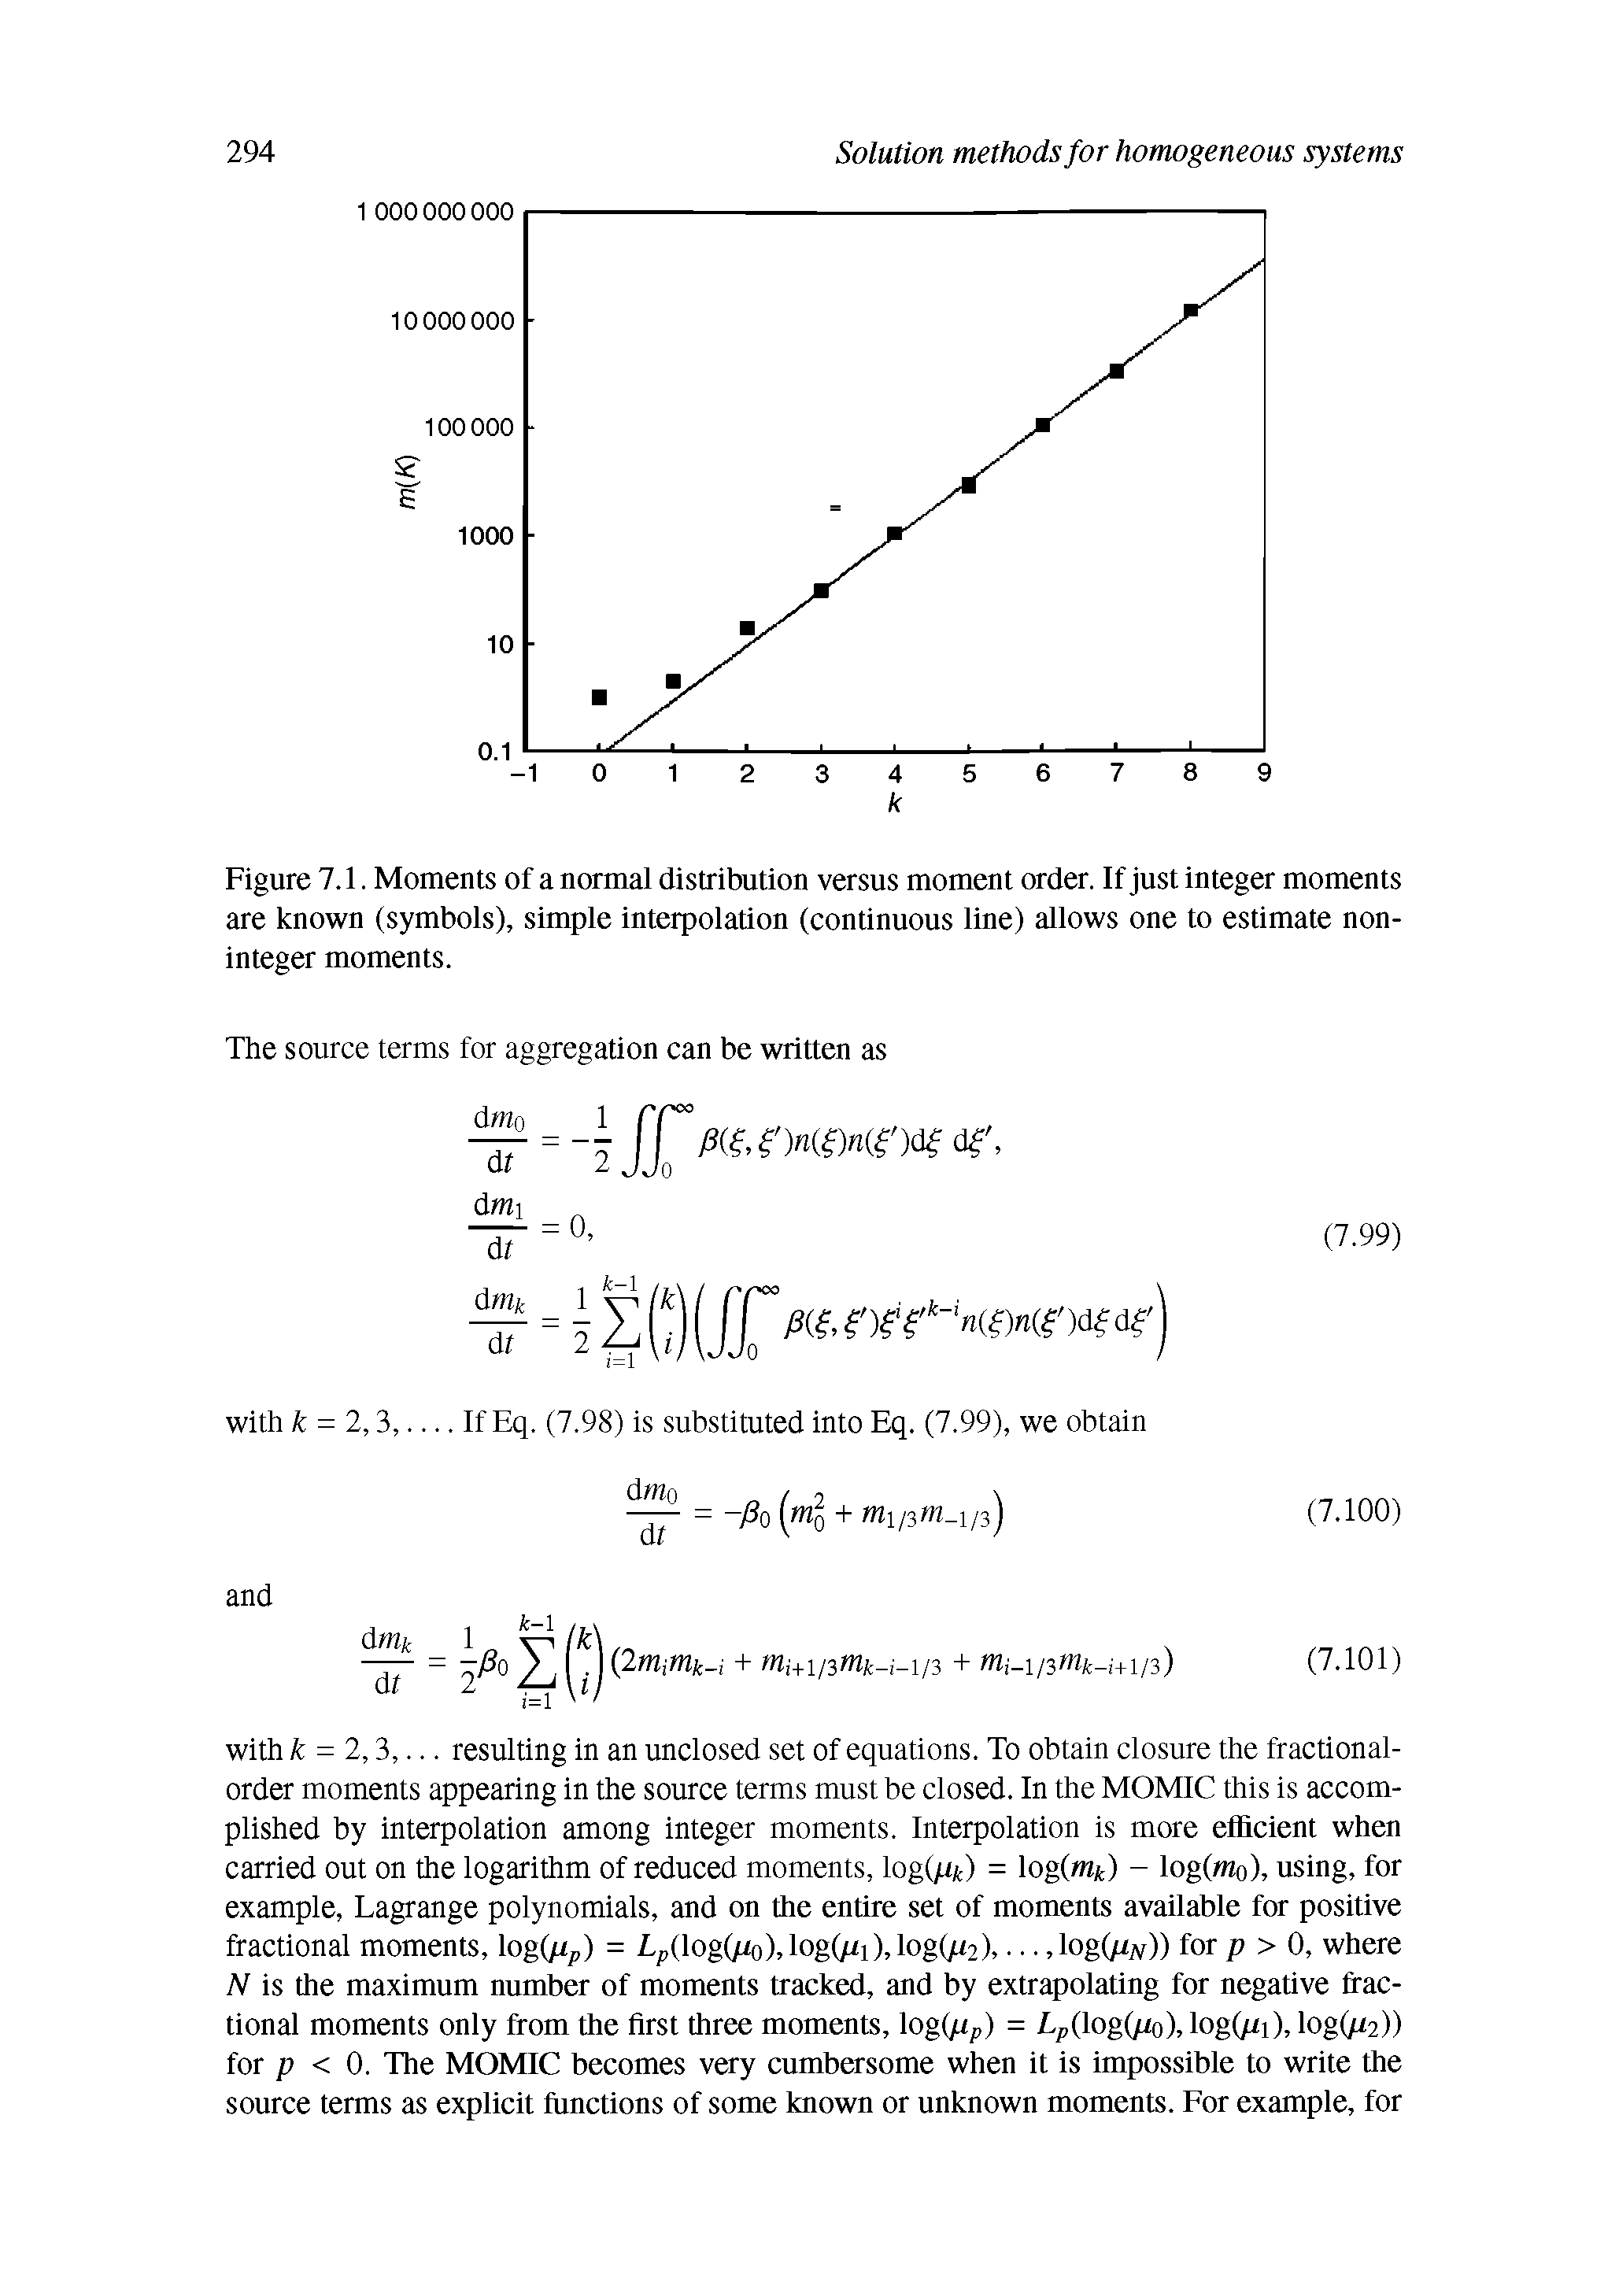 Figure 7.1. Moments of a normal distribution versus moment order. If just integer moments are known (symbols), simple interpolation (continuous line) allows one to estimate noninteger moments.